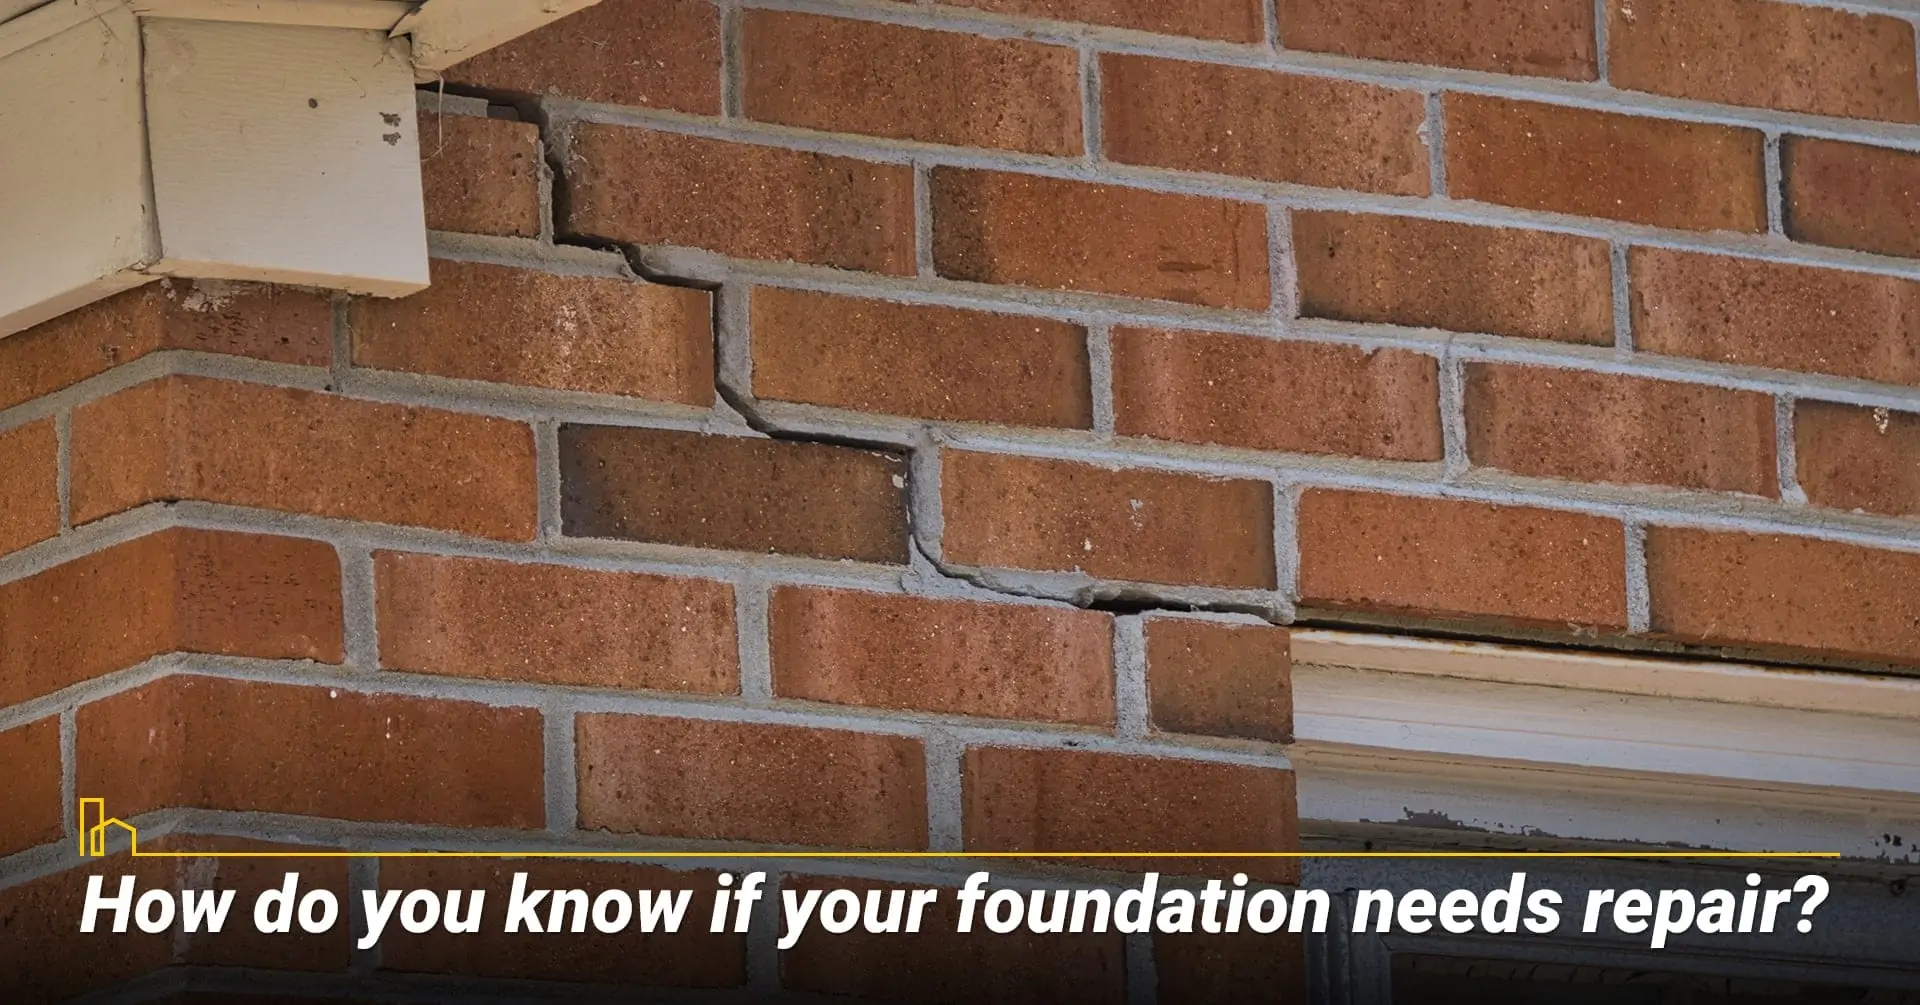 How do you know if your foundation needs repair? Signs that foundation needs repair